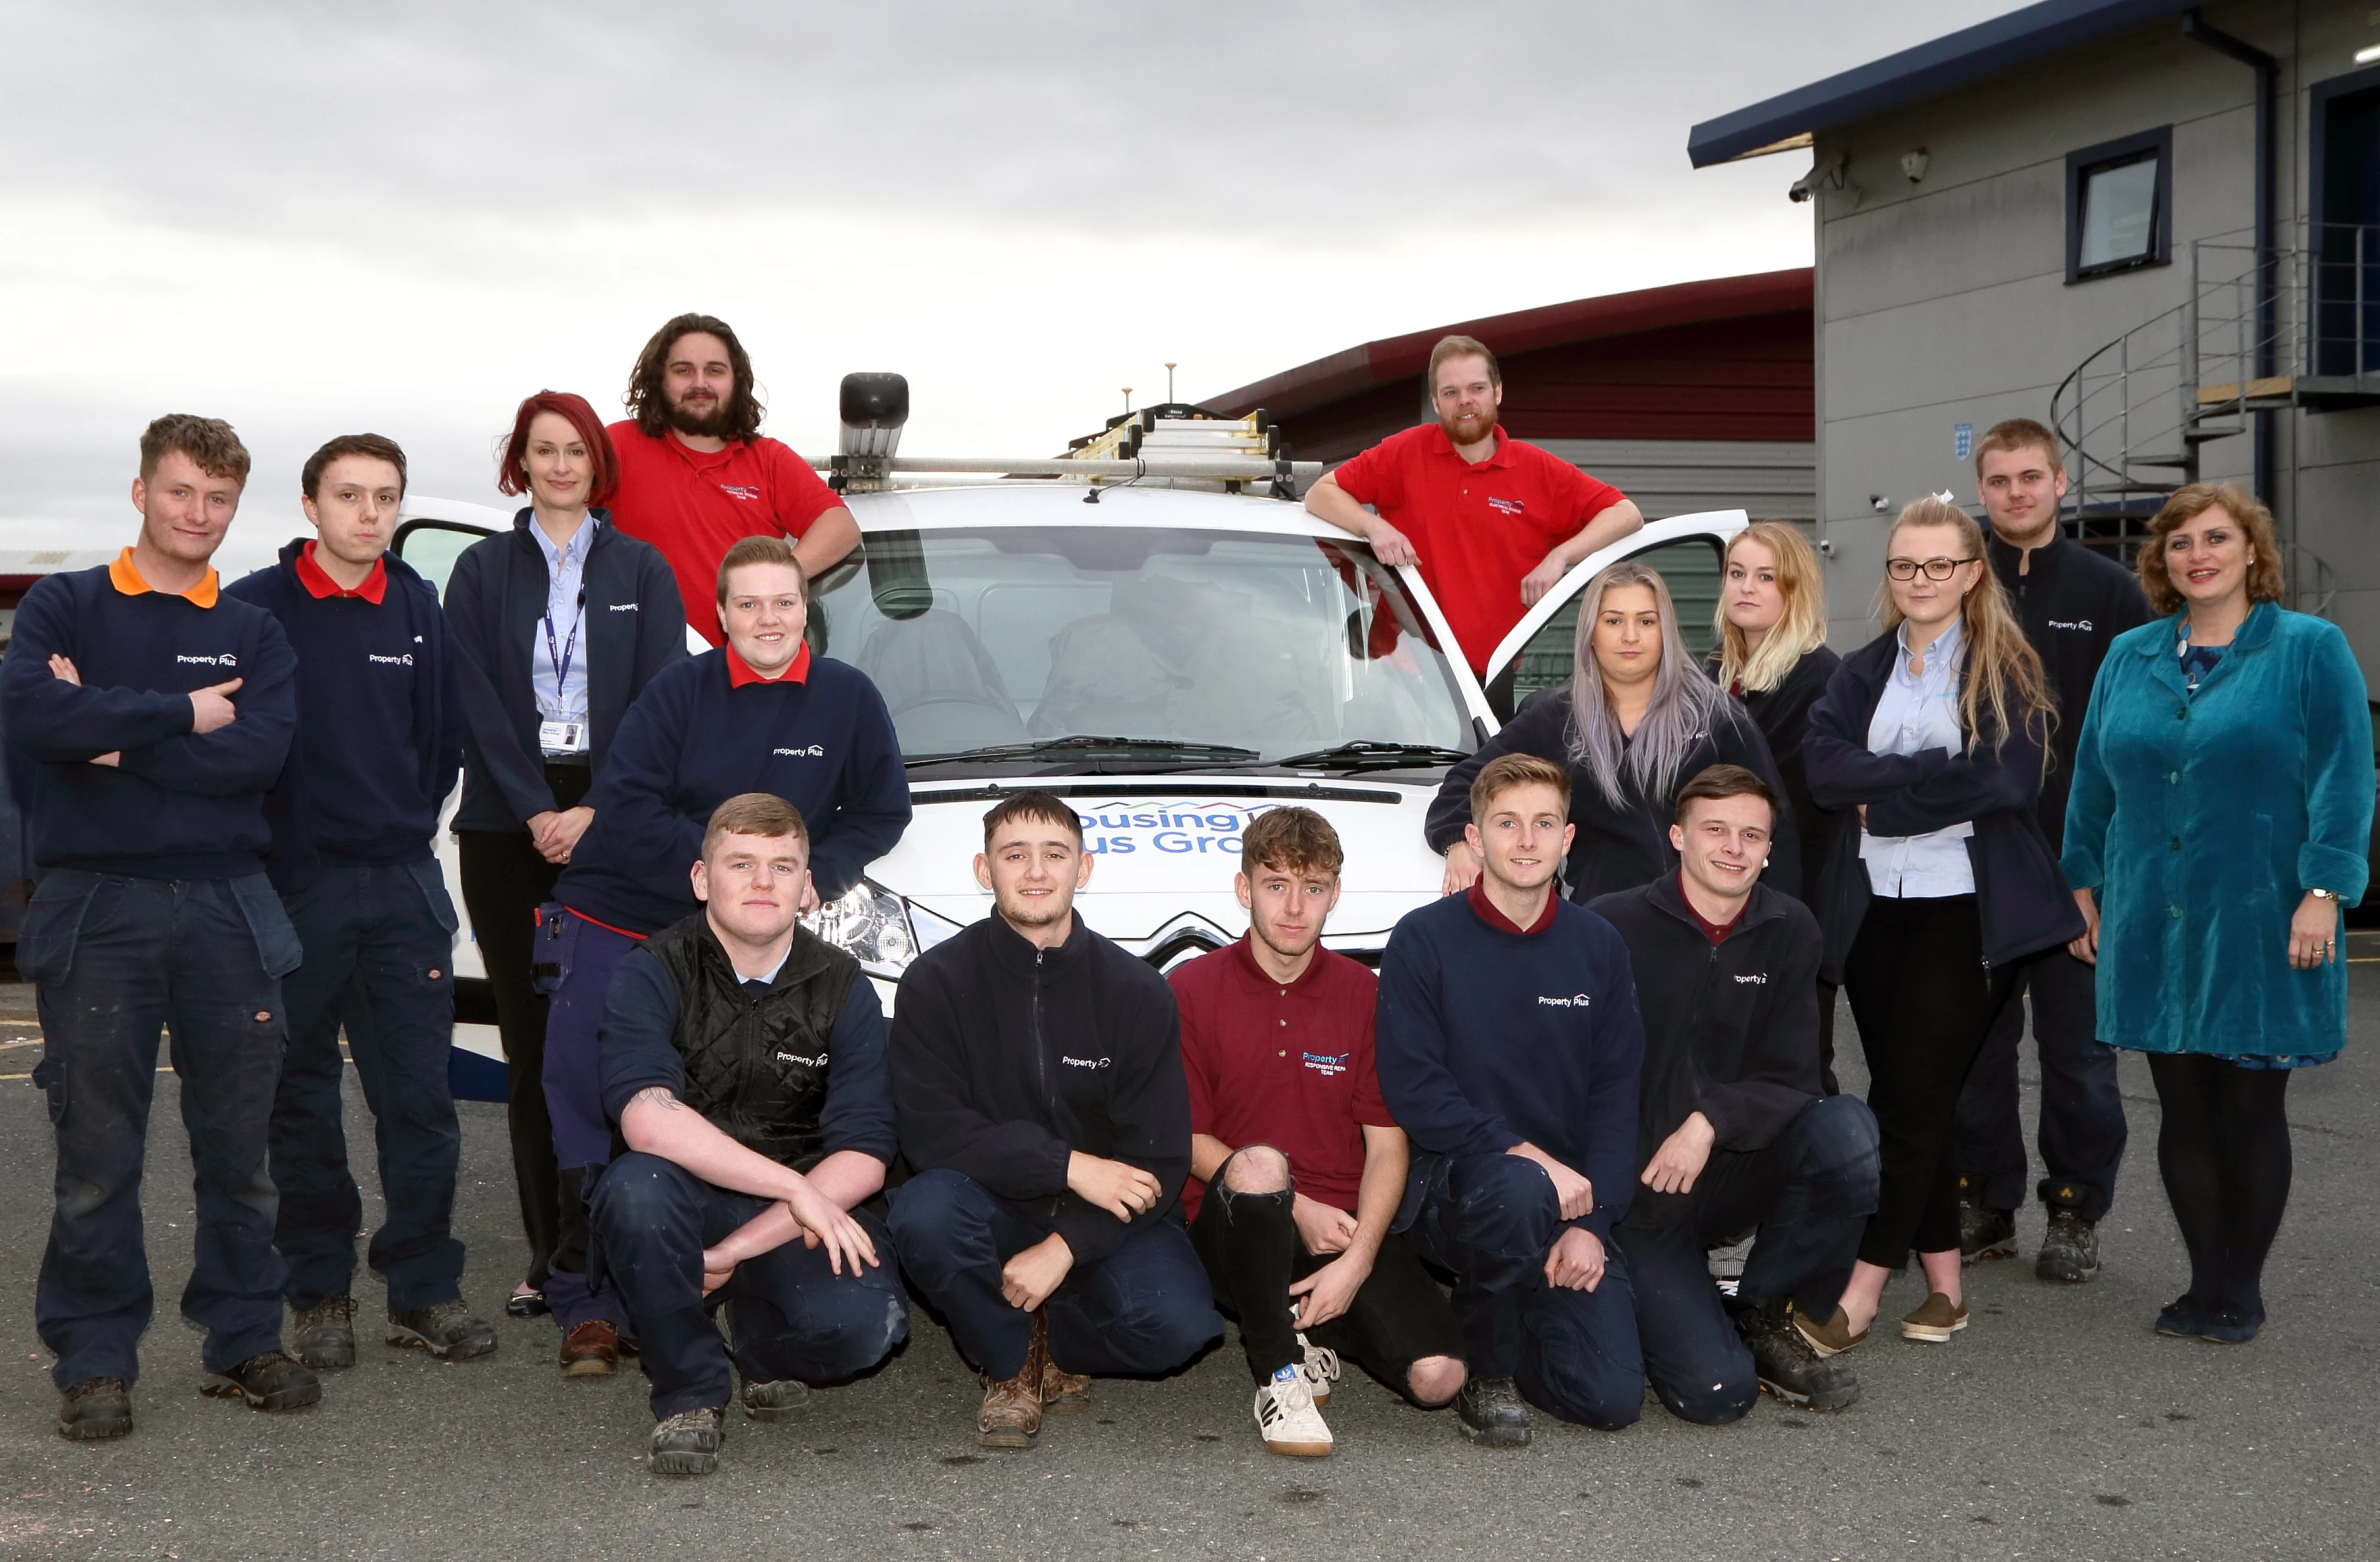 Housing Plus Group chief executive Sarah Boden (right) with some of the Group's apprentices